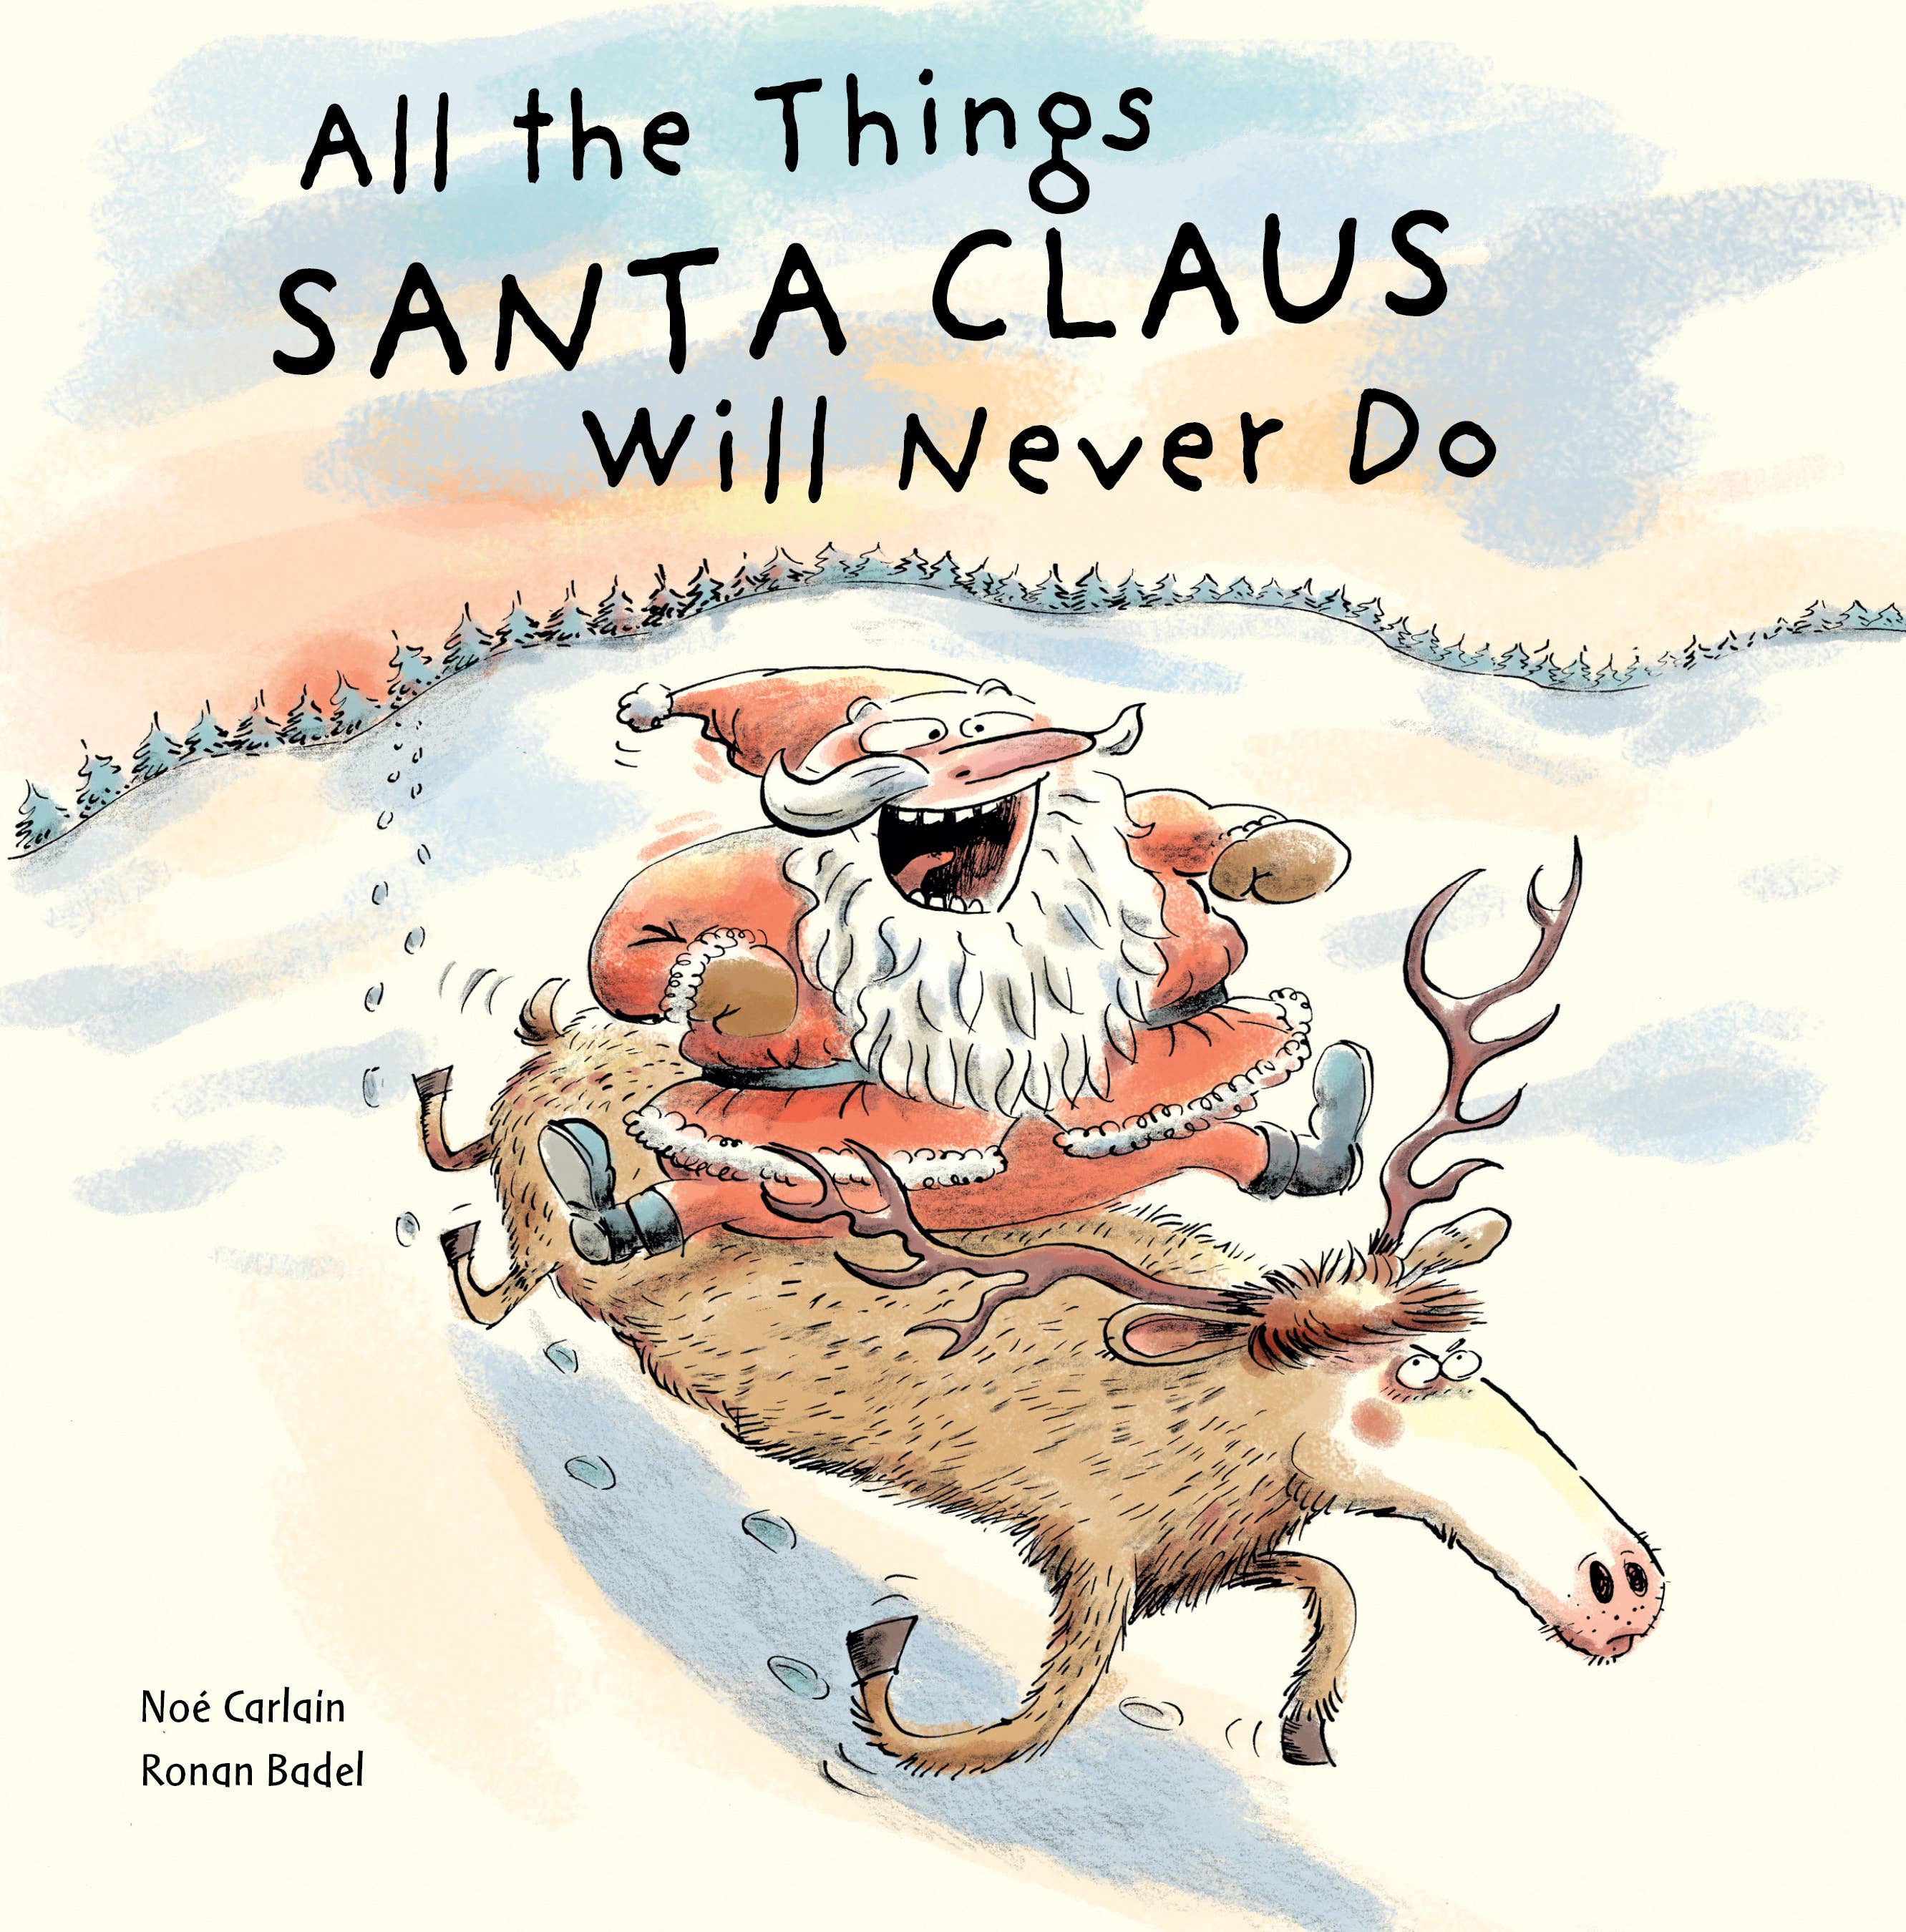 All the Things Santa Claus Will Never Do